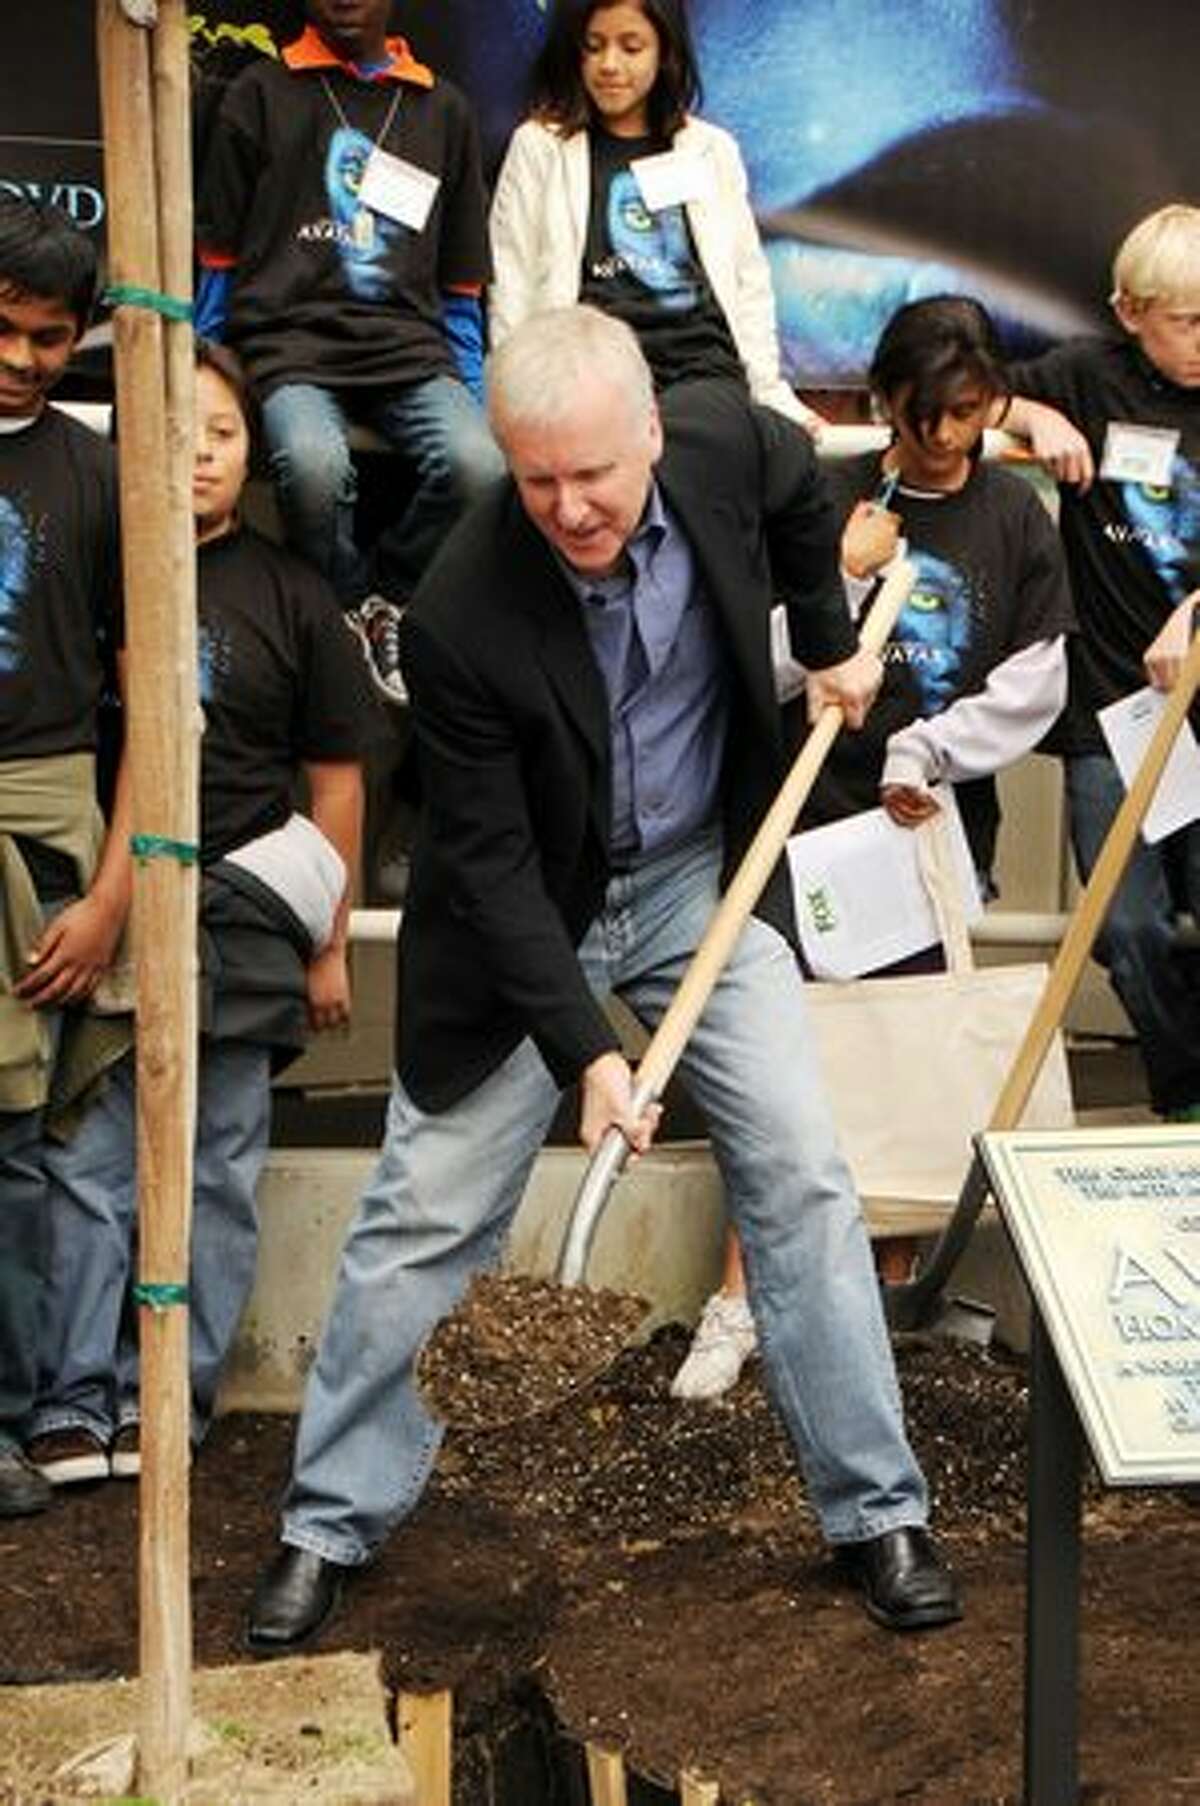 Director James Cameron attends the 20th Century Fox & Earth Day Network's "Avatar" Tree Planting Event on April 22, 2010 in Los Angeles, California.